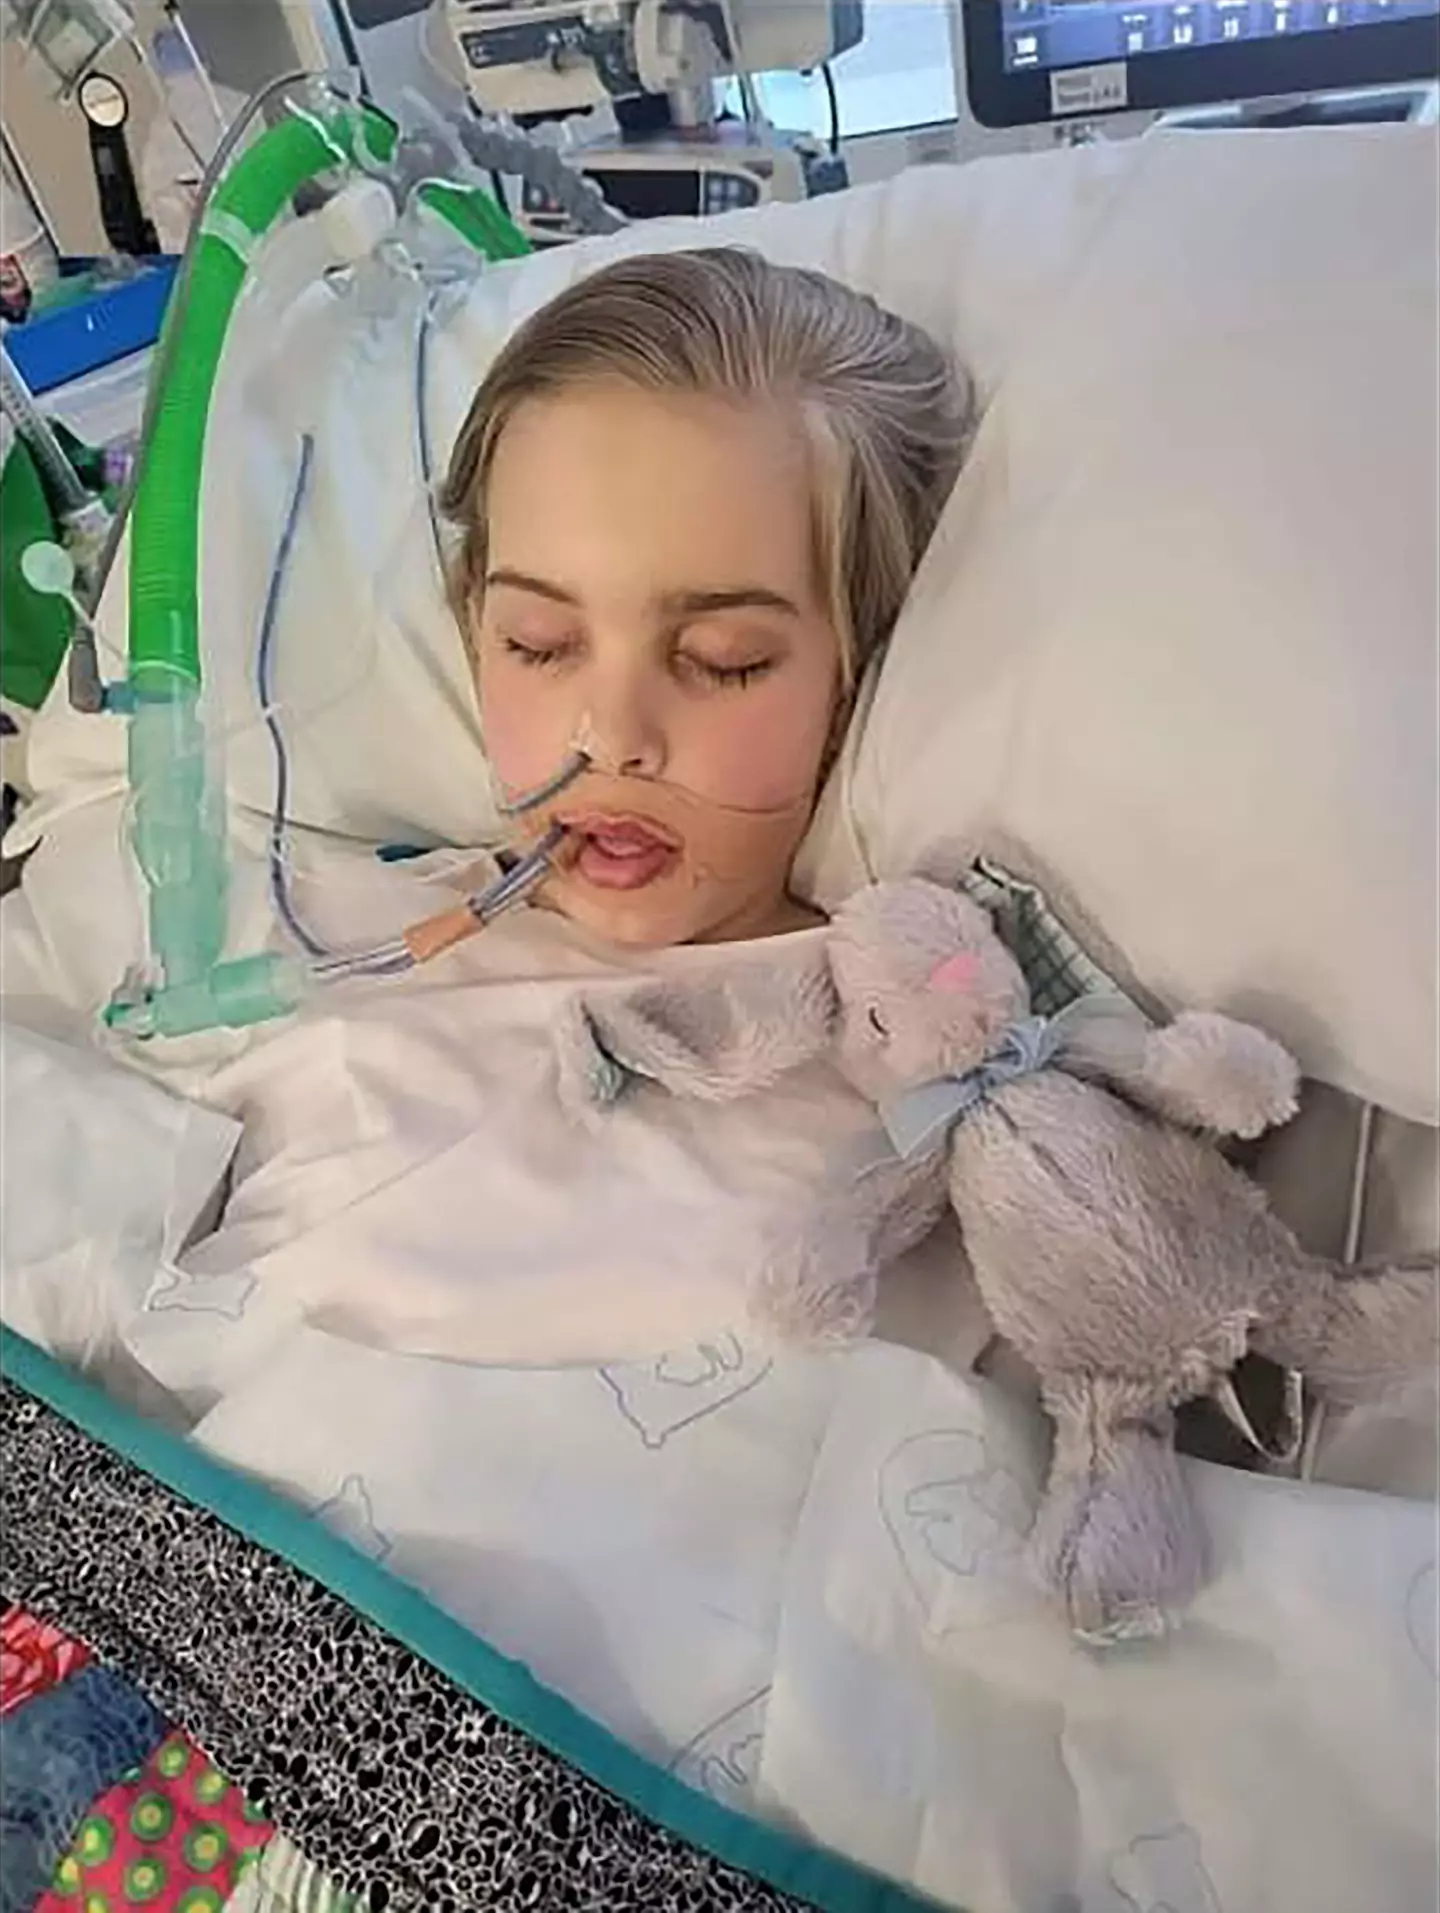 The young teen has relied on mechanical ventilation since 7 April.